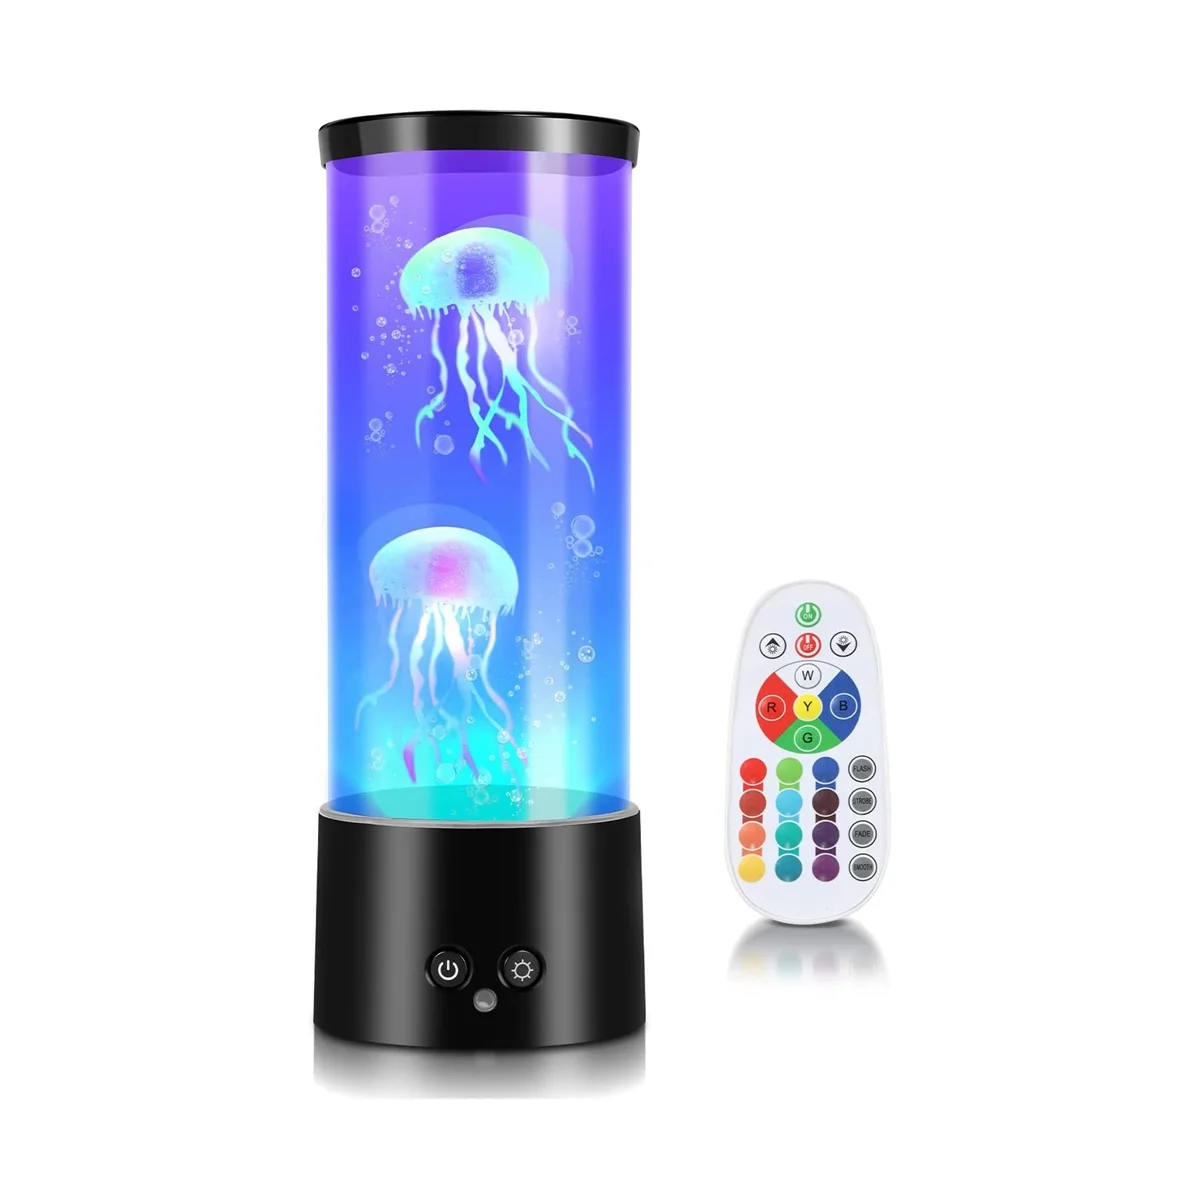 

RGB Jellyfish Lamp Jellyfish Aquarium with Remote Control Lava Lamp Coloured Mood Light for Home Office Decoration